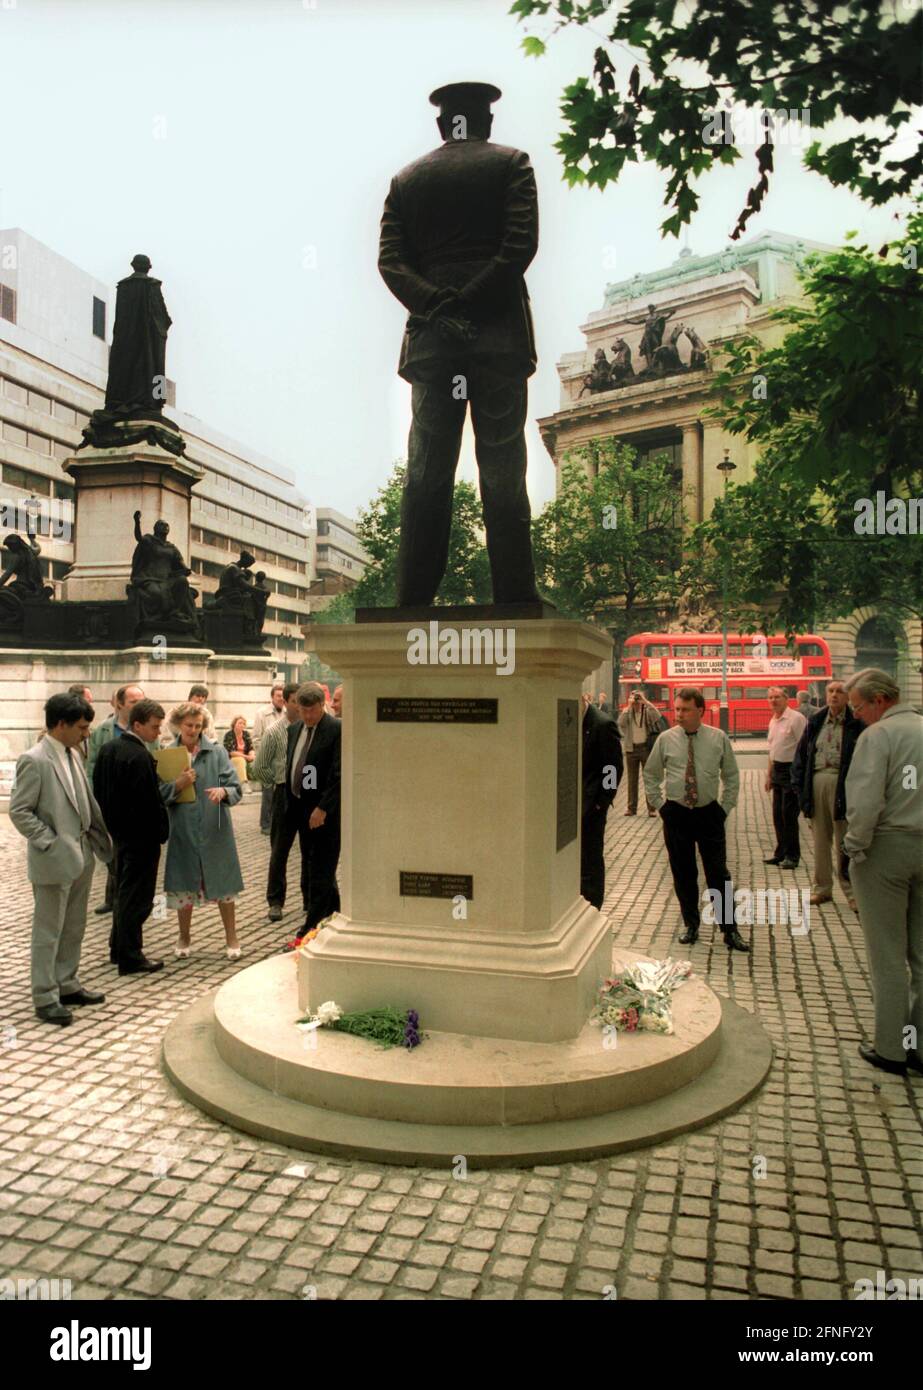 Great Britain / England / London / 5 / 1992 City of London. Monument dedicated to Bomber Harris, who organized the air raids on German cities during the last world war. He is responsible for many dead German civilians. // air war / history / war / allies / german victims [automated translation] Stock Photo